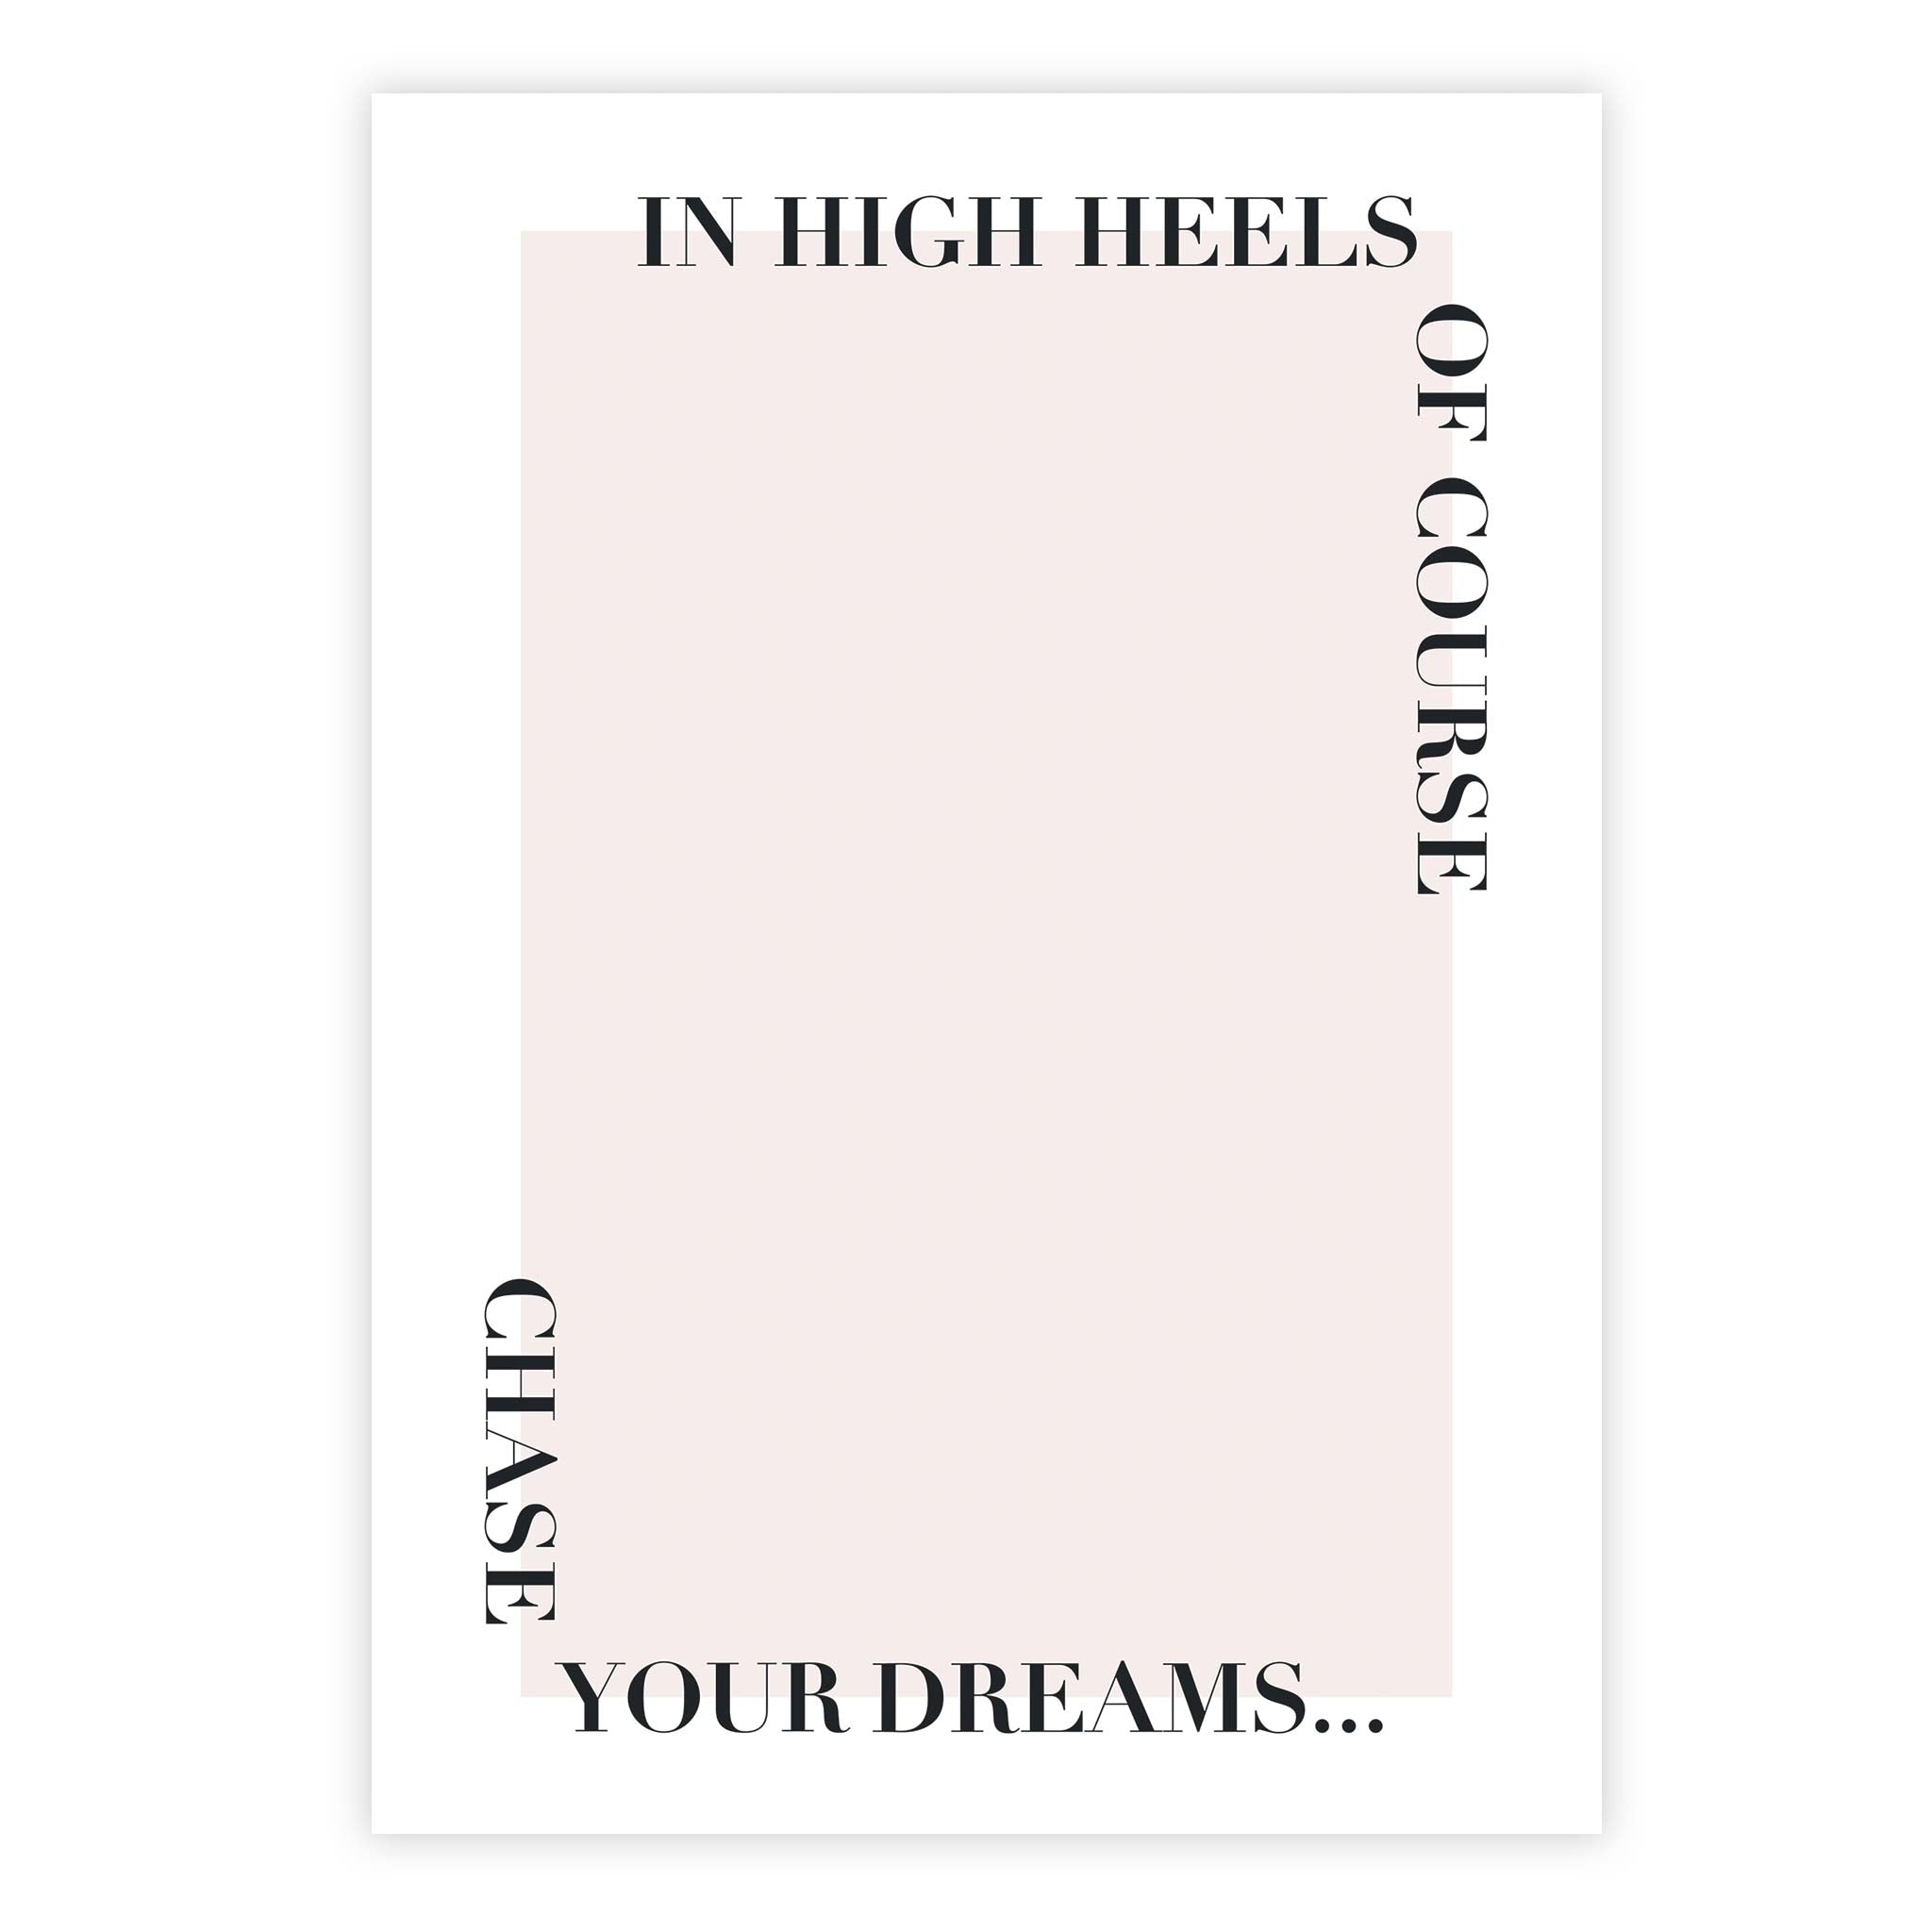 Chase your dreams...in high heels of course